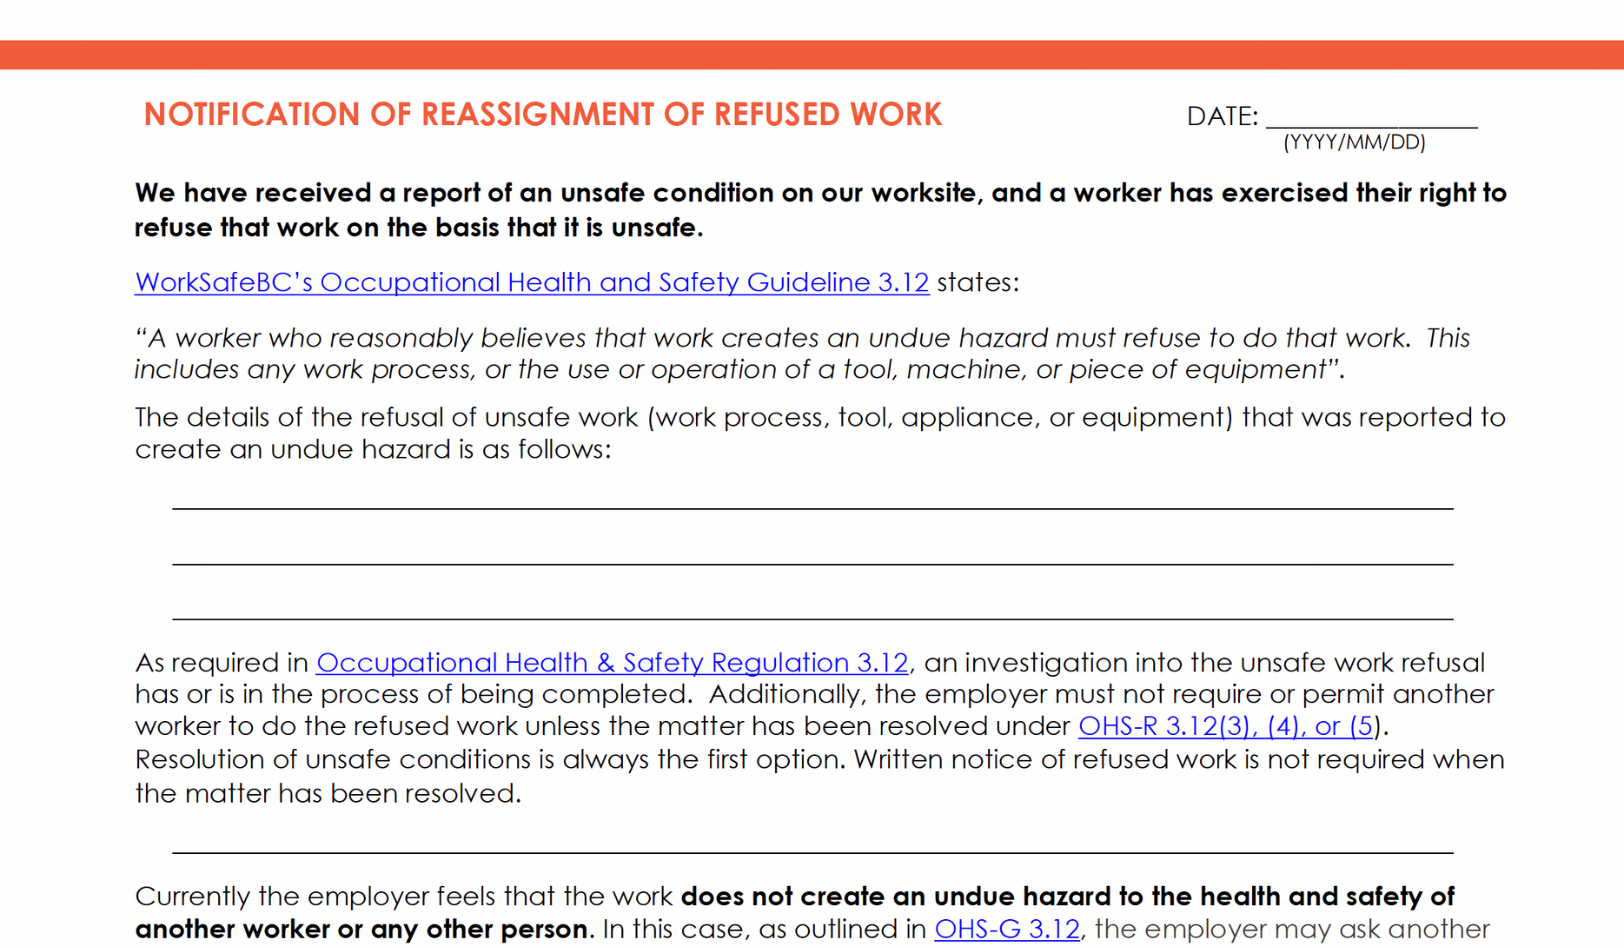 Notification of Reassignment of Refused Work